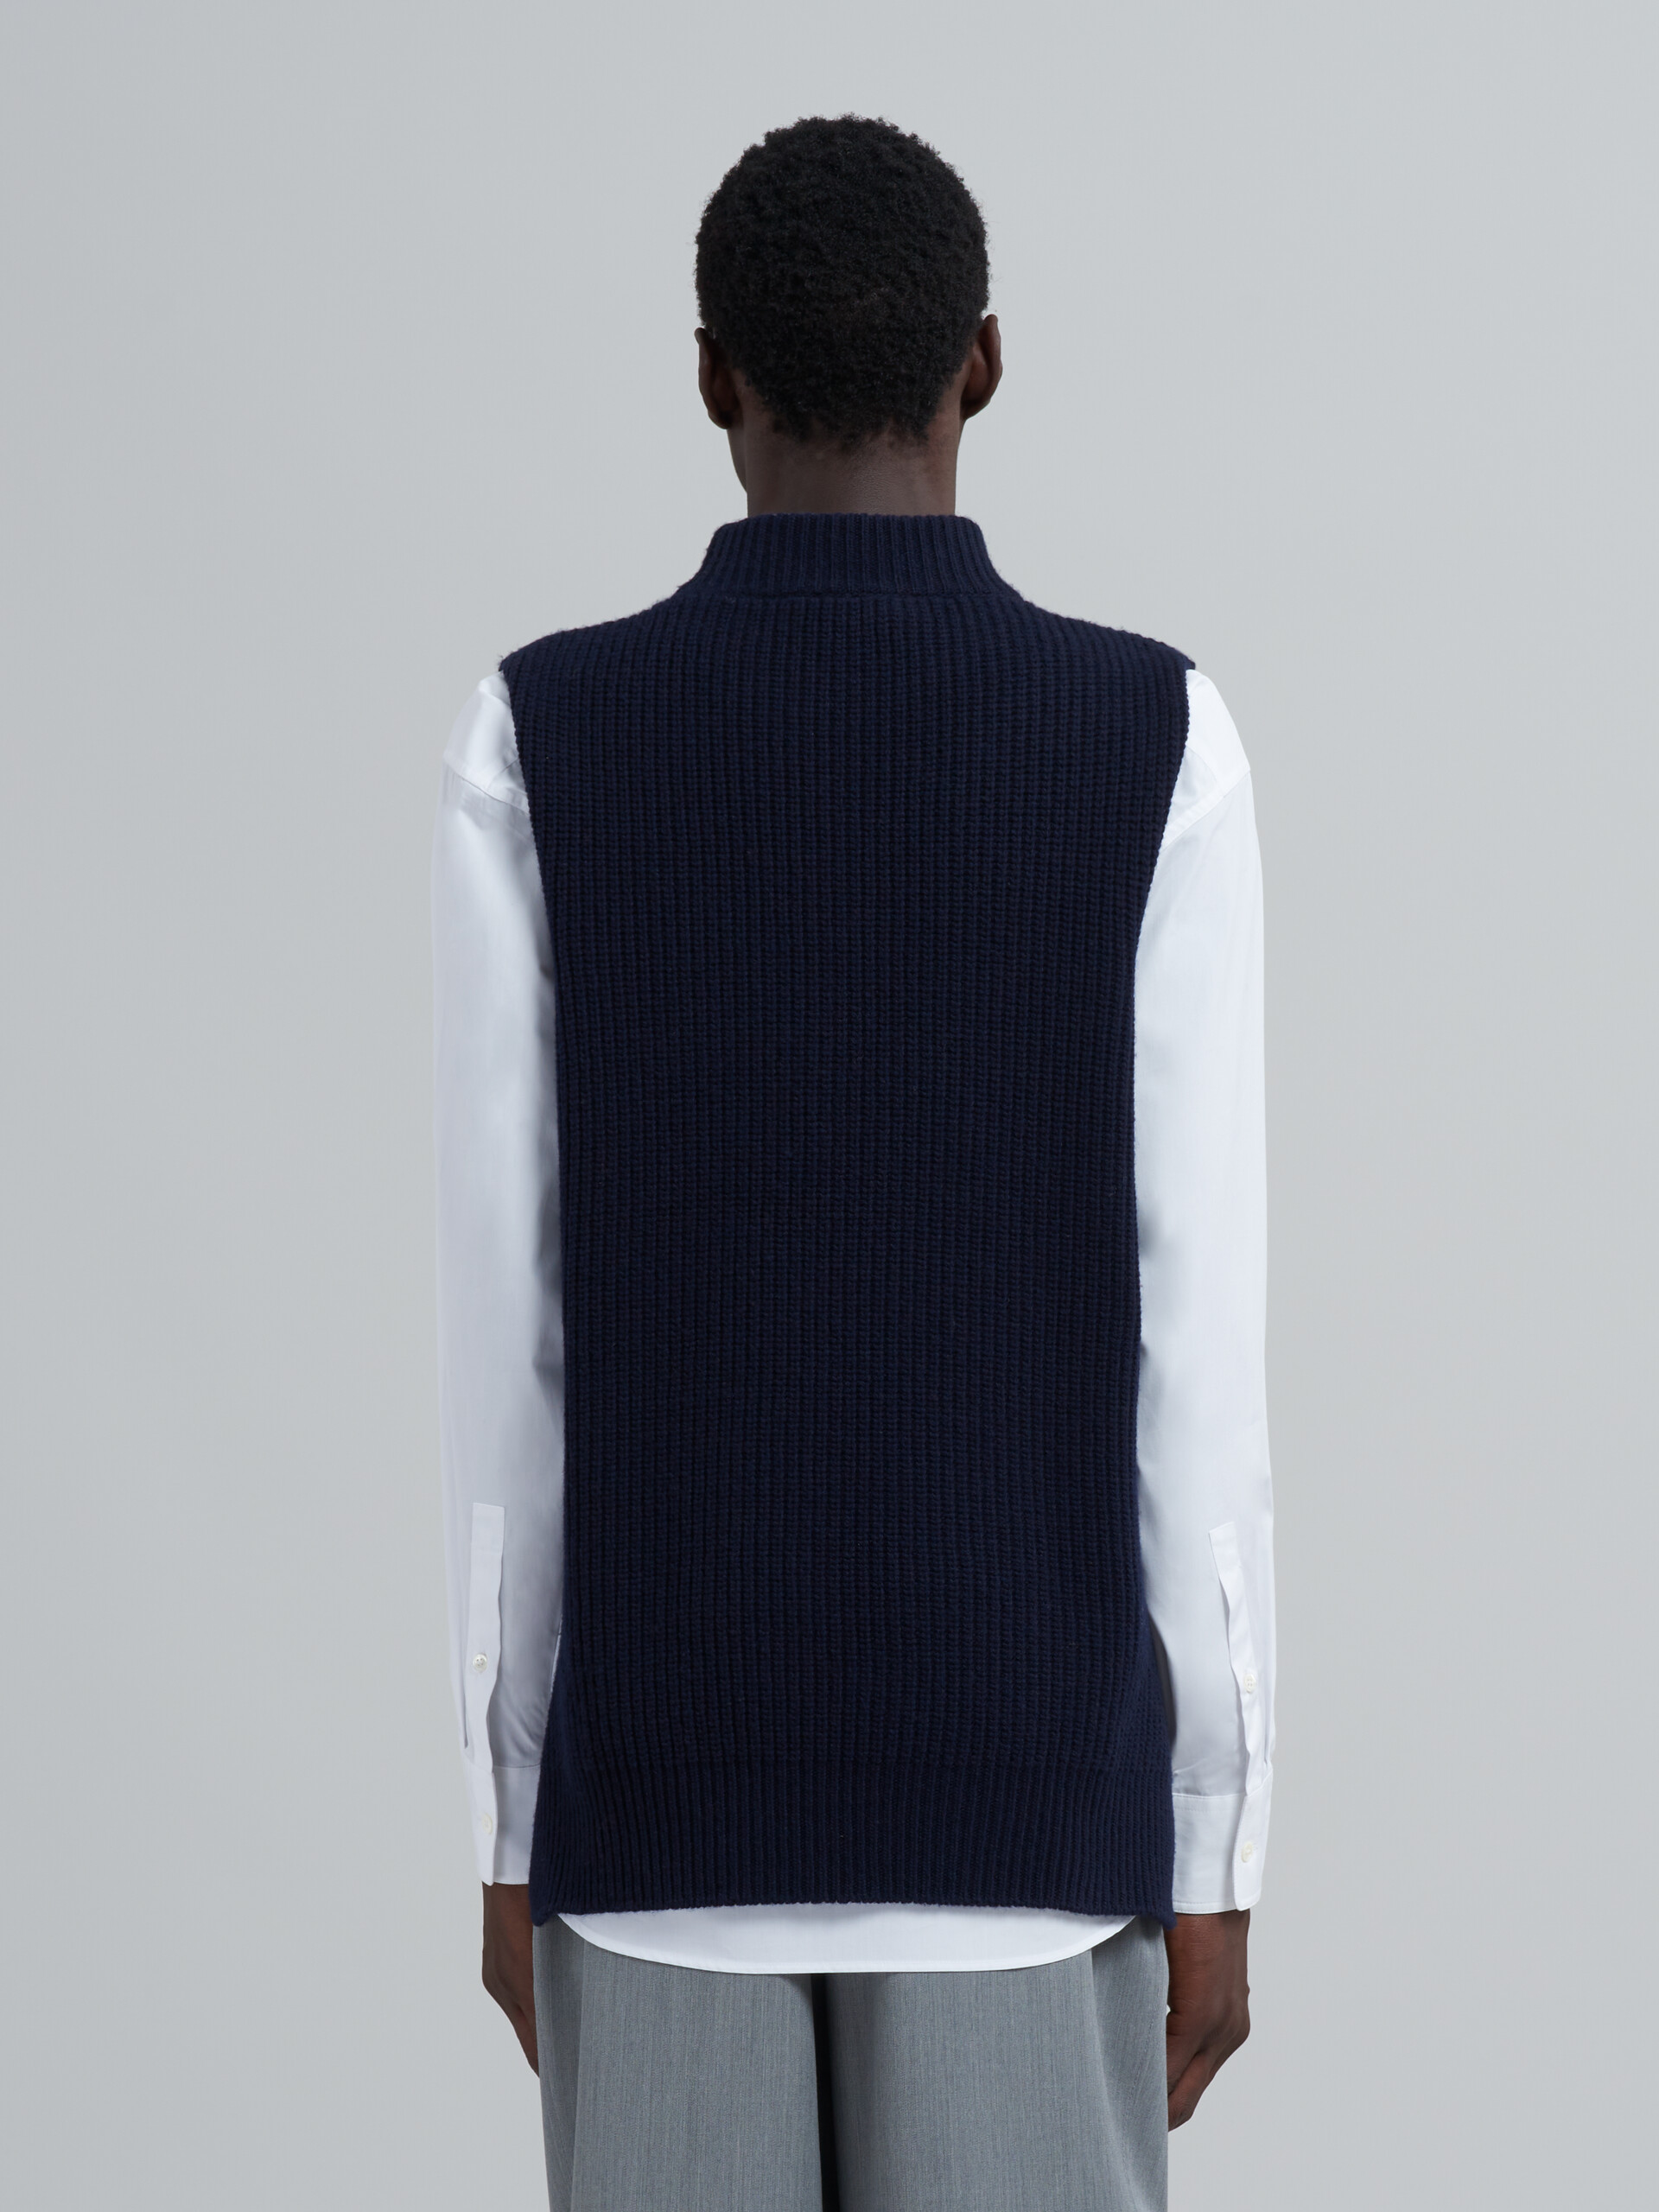 Asymmetric carded wool vest - Pullovers - Image 3